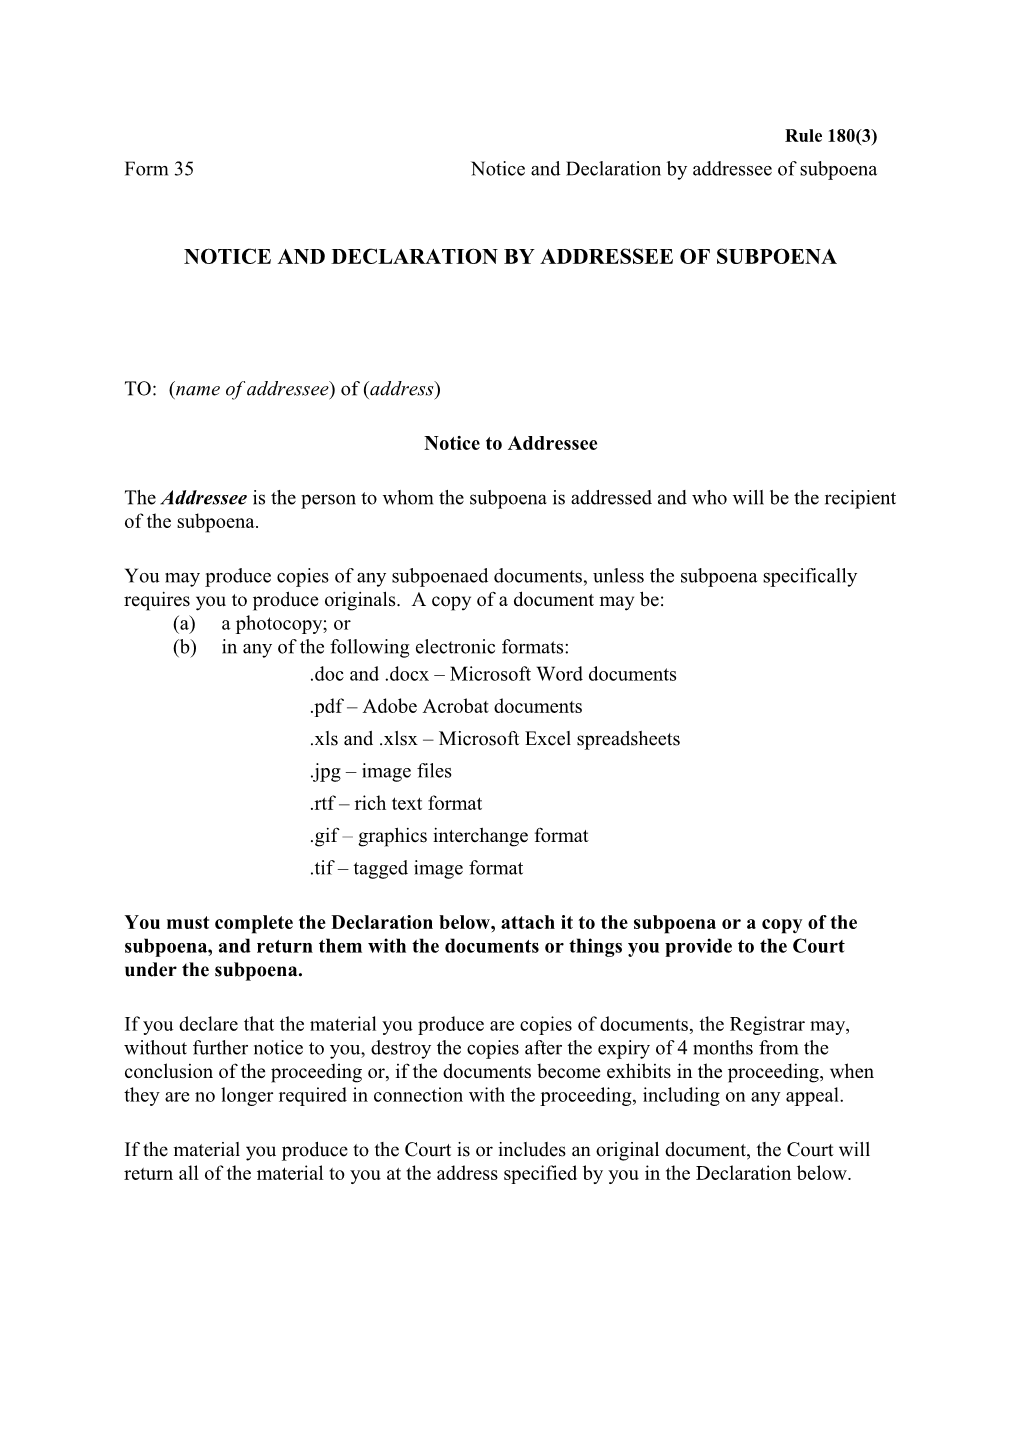 Form 35 - Notice and Declaration by Addressee of Subpoena